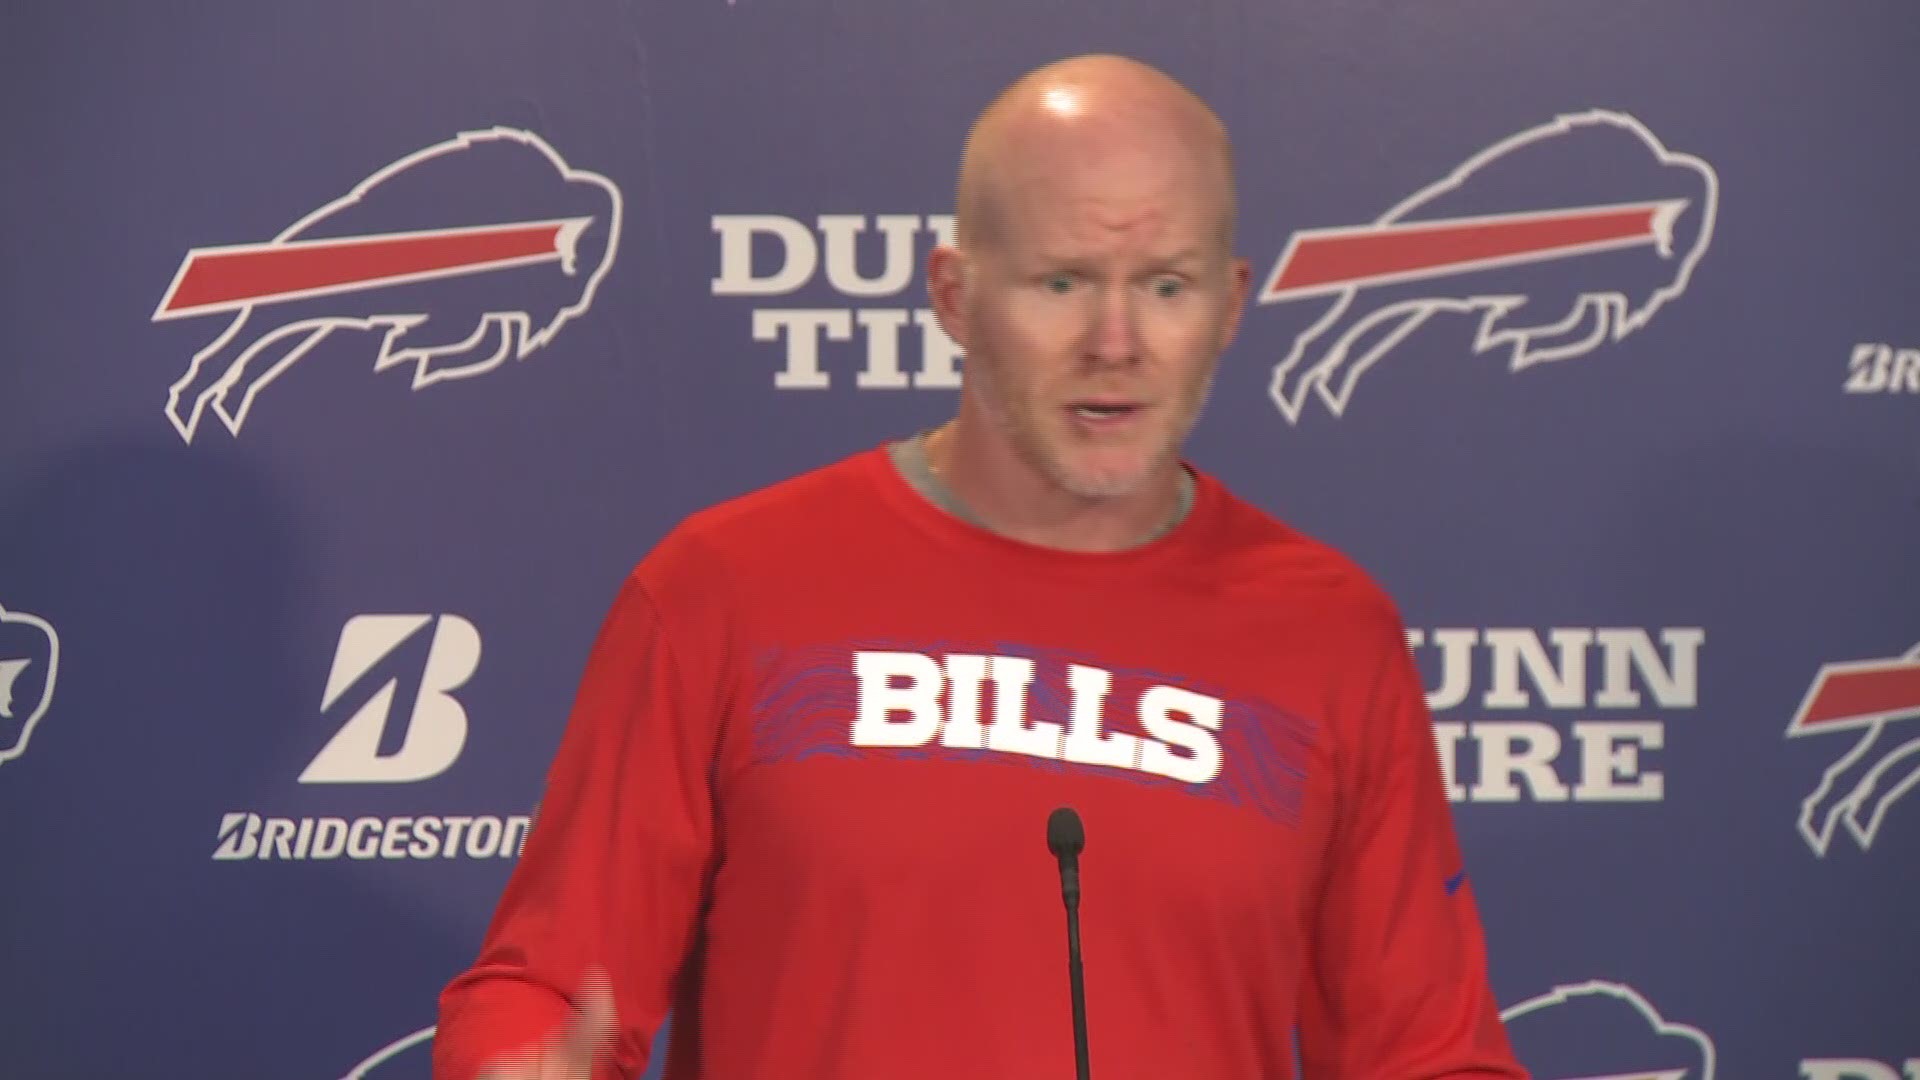 Sean McDermott discussed the quarterback situation given an injury to Josh Allen and Nathan Peterman's poor play in Houston.